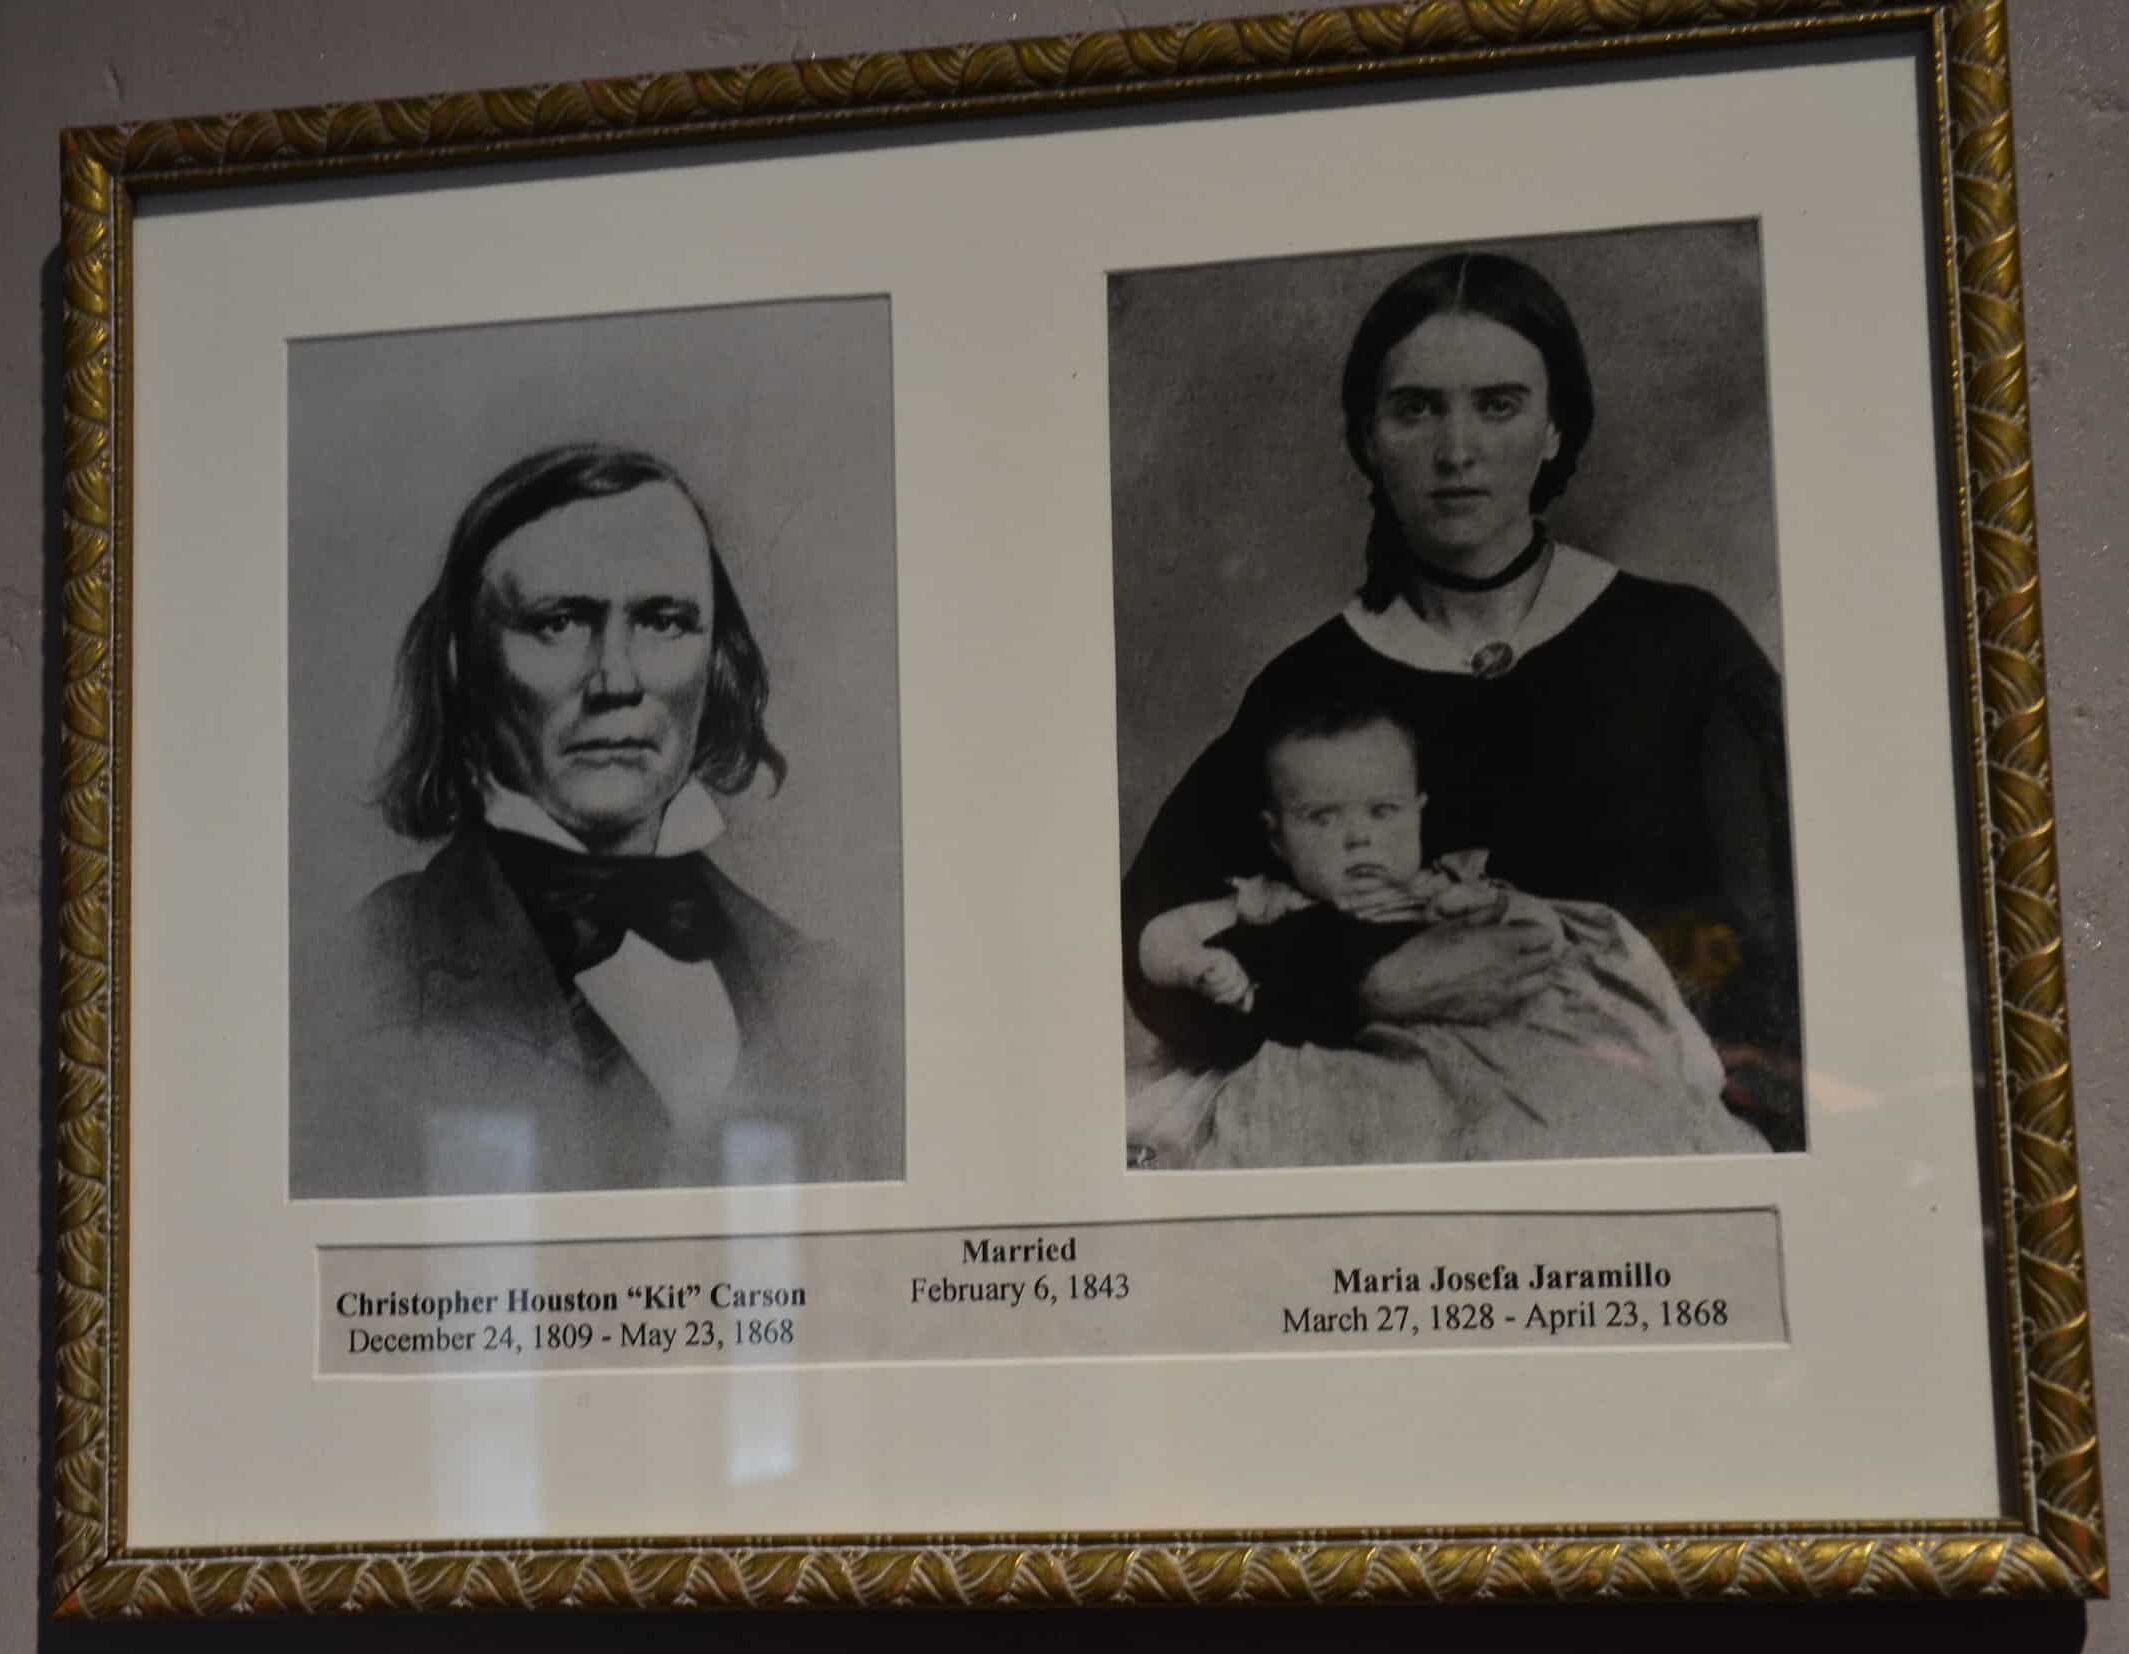 Photos of Kit Carson and Josefa Jaramillo at the Kit Carson Home and Museum in Taos, New Mexico